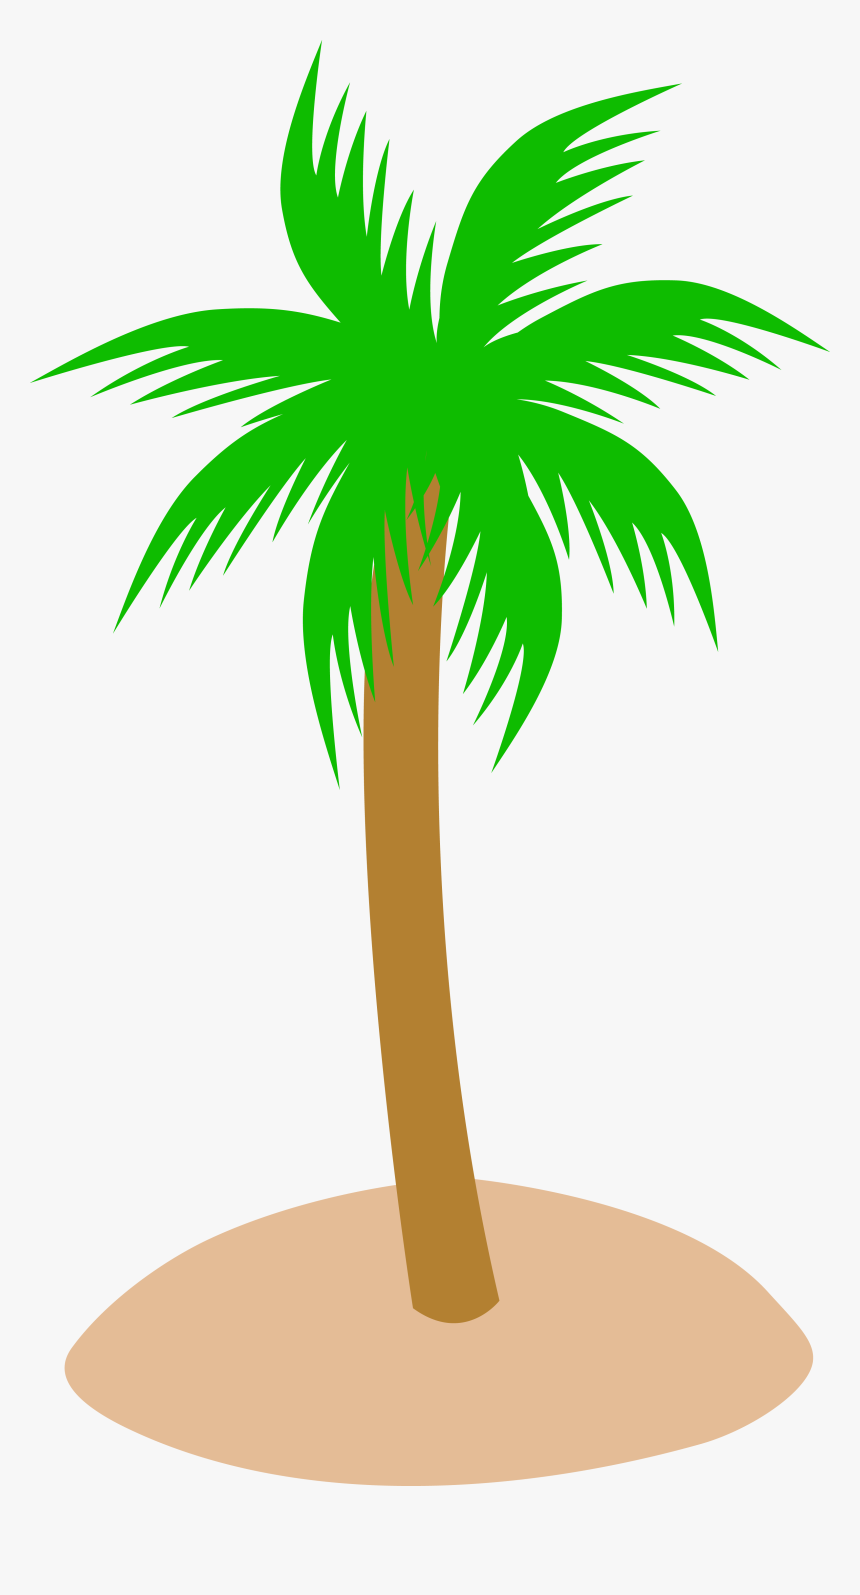 Transparent Sand Png - Transparent Background Palm Tree Clipart, Png Download, Free Download